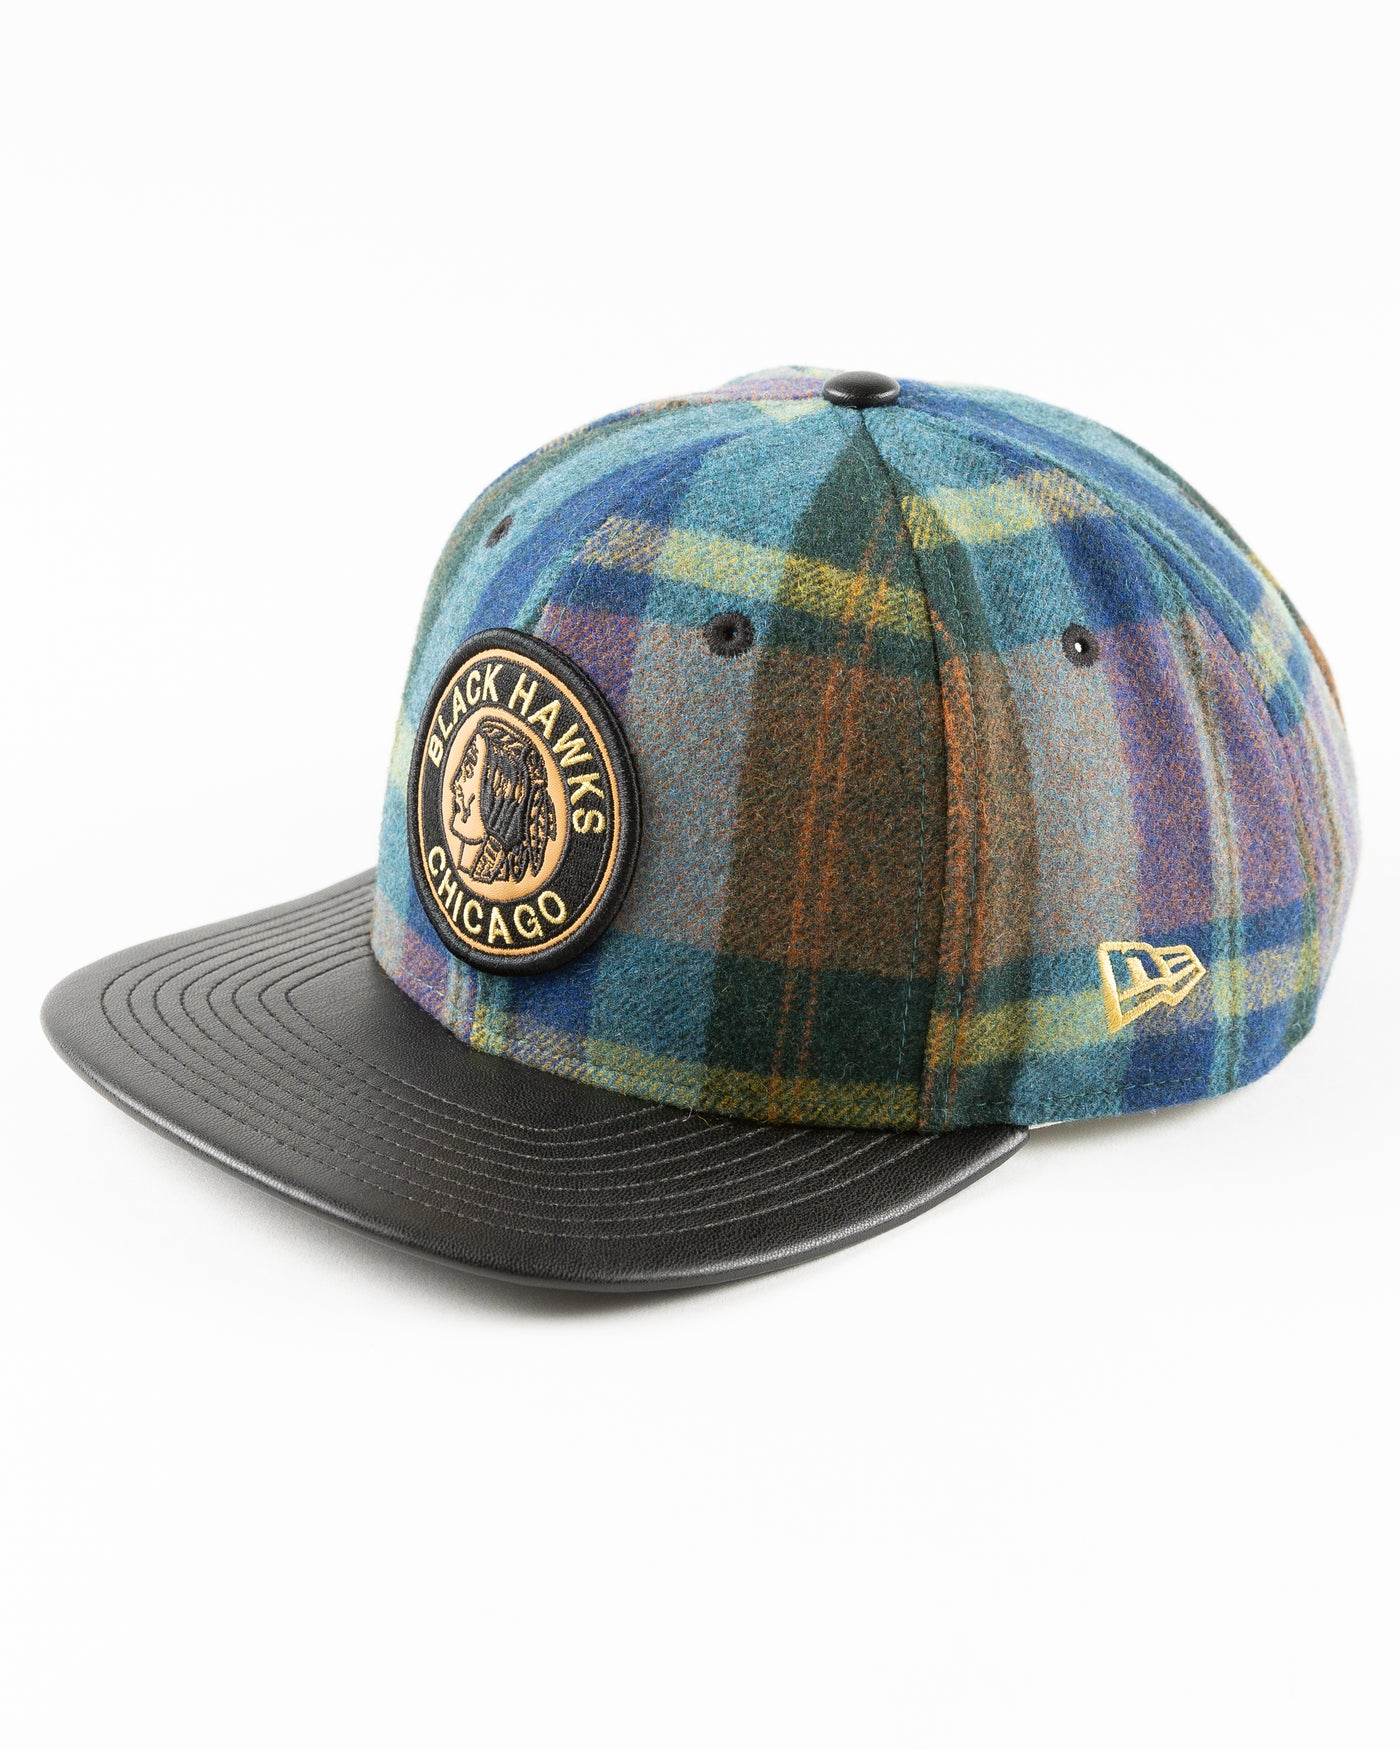 New Era snapback with wool checker crown and vintage Chicago Blackhawks logo and leather flat brim - left angle lay flat